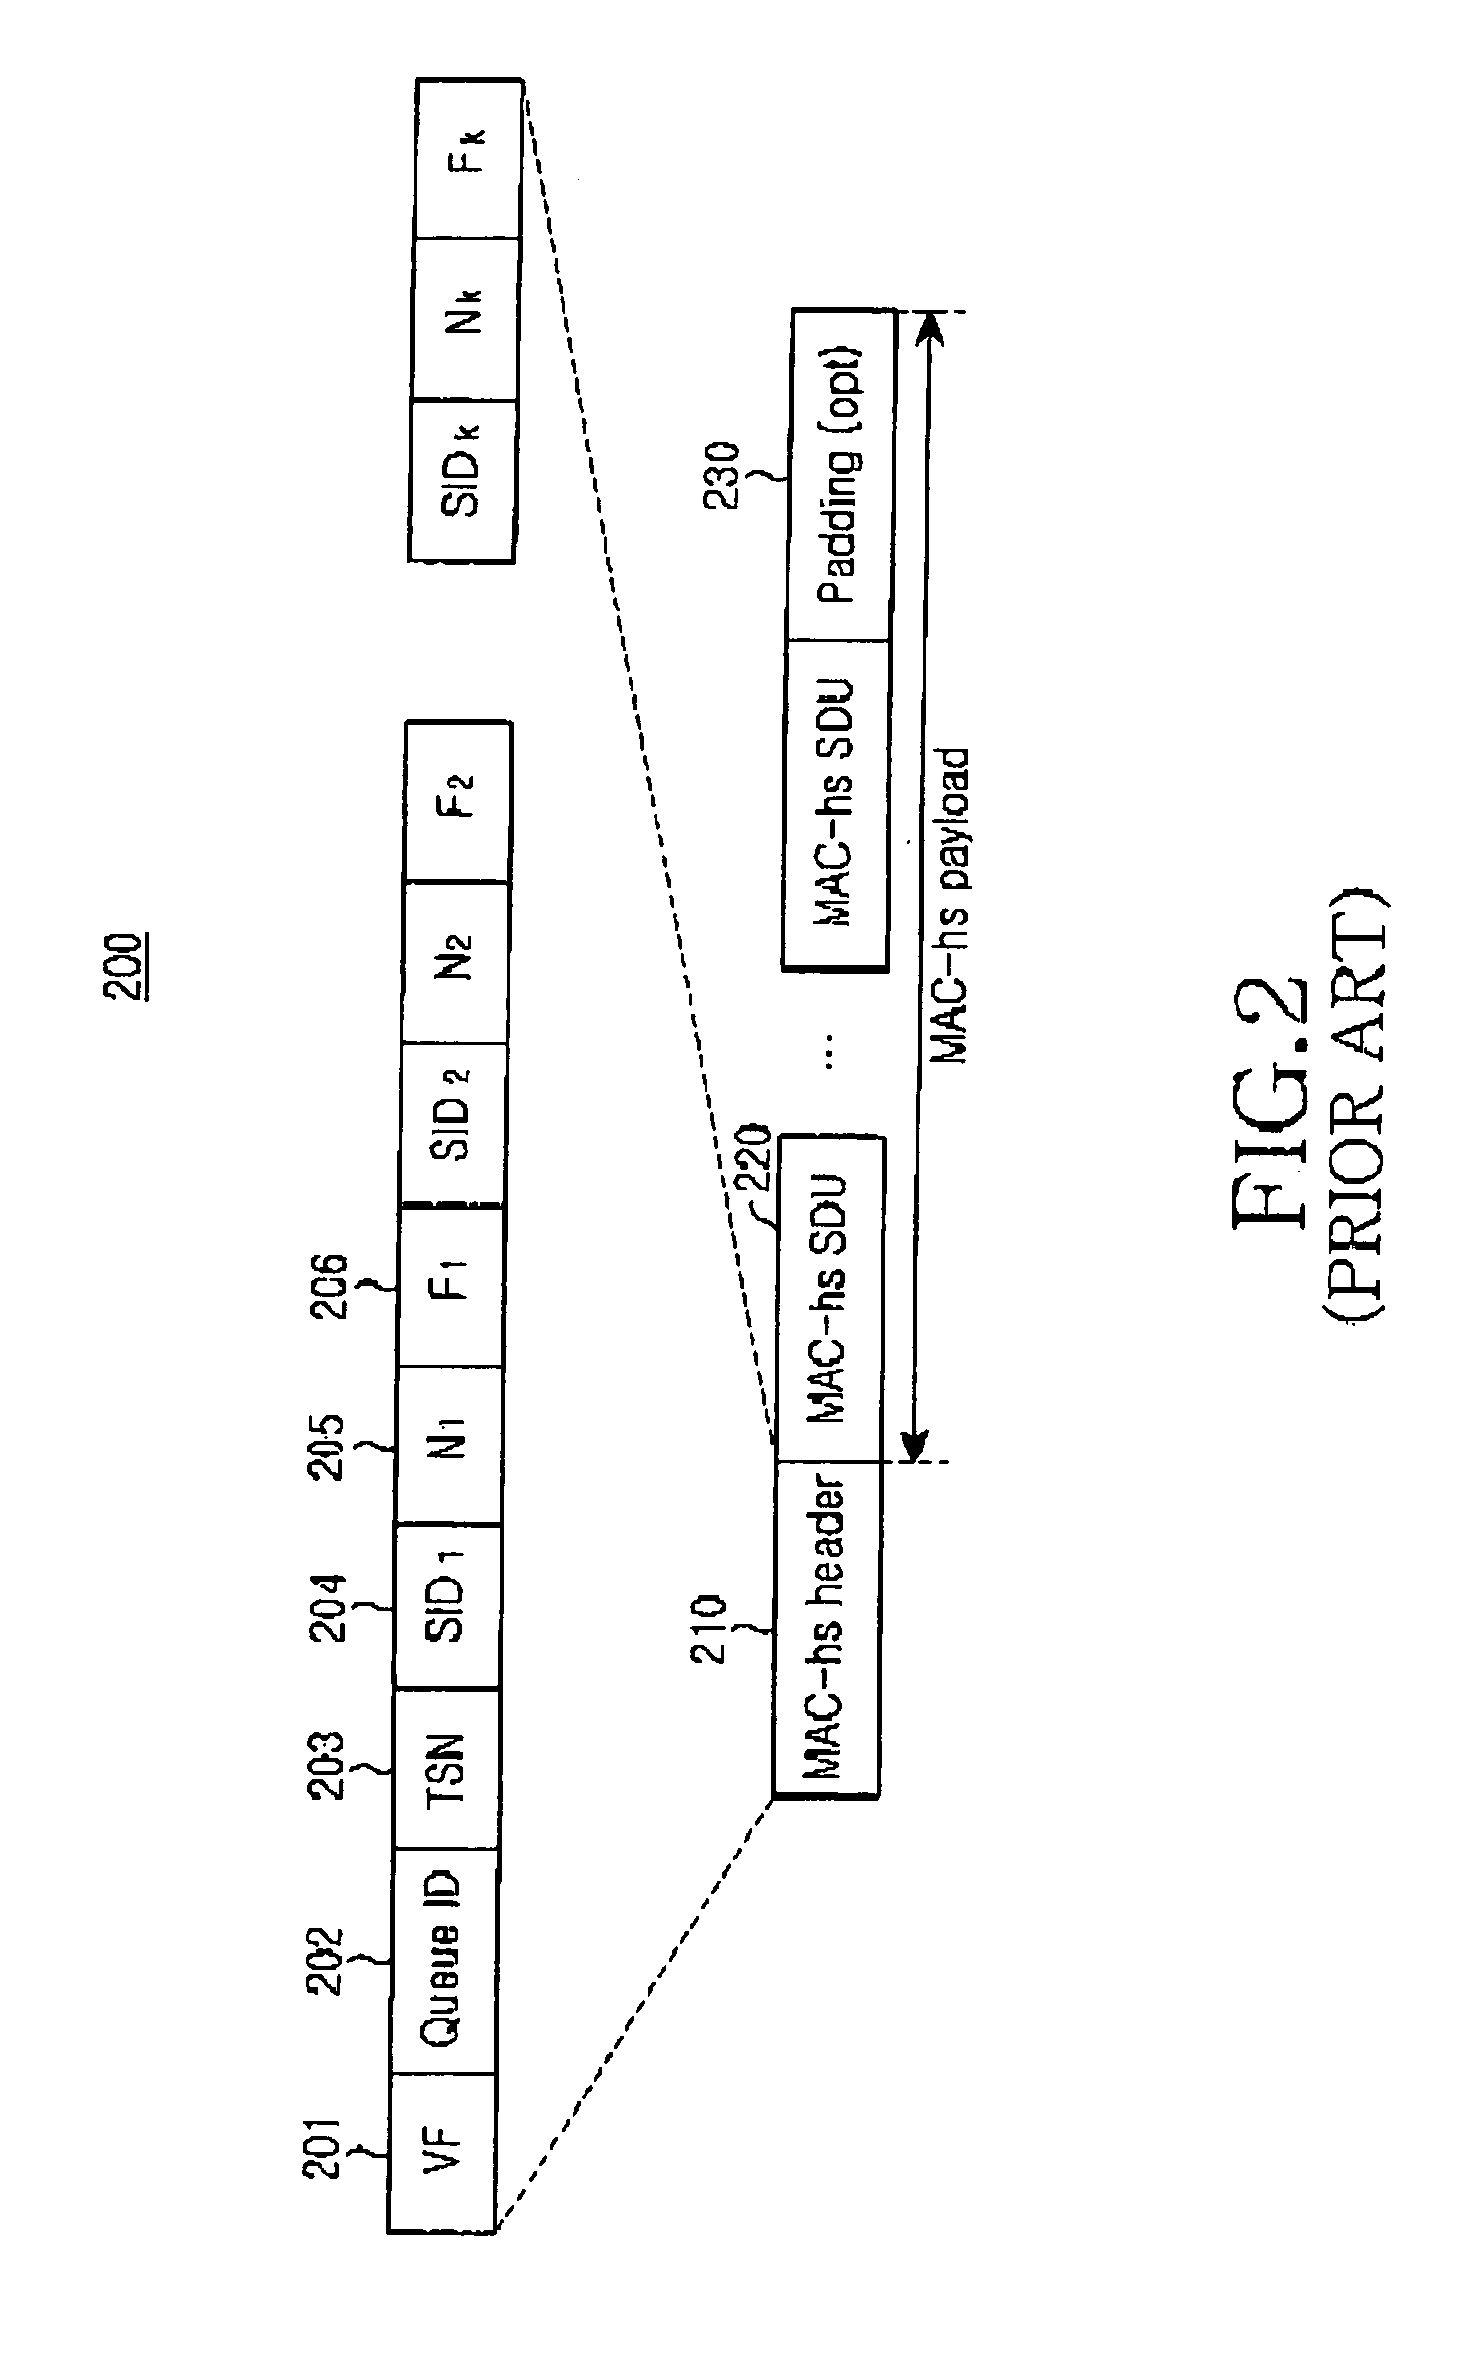 Mobile communication system employing high speed downlink packet access and method for improving data processing speed in the same